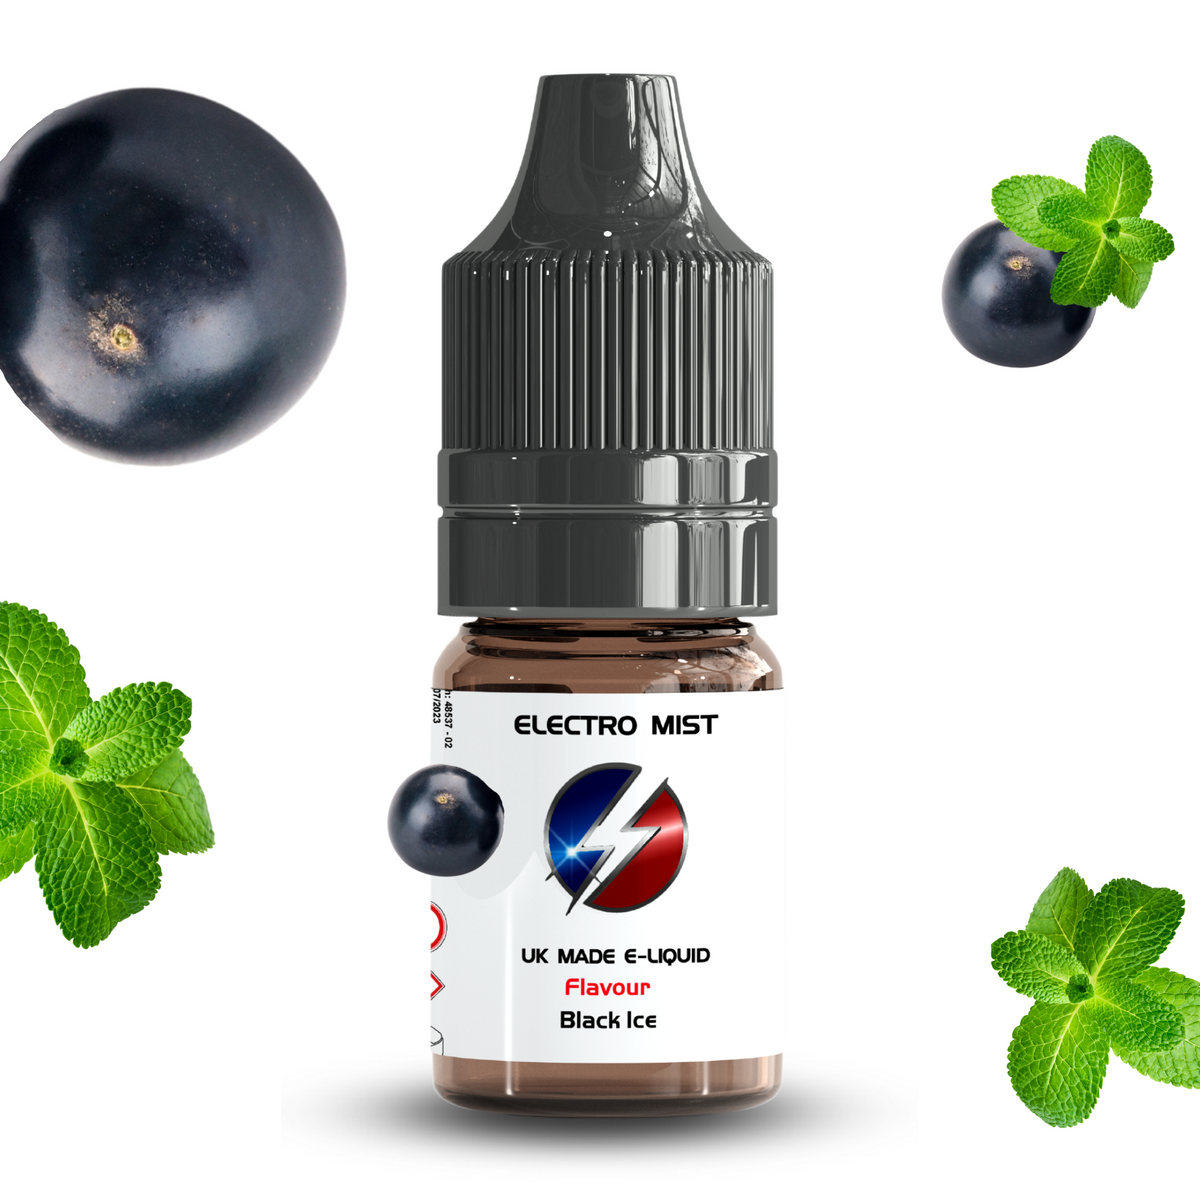 Electromist, the e-liquid brand you can trust. Get your taste buds ready for a flavour sensation, Black Ice. Nicotine Content: 3mg/6mg/12mg. Products may contain nicotine. For over 18s Only ejuice, vape pen, eliquid, e cigarette, 10ml, vaping, cloud, PG, VG, 60/40, vape liquid, Flavour